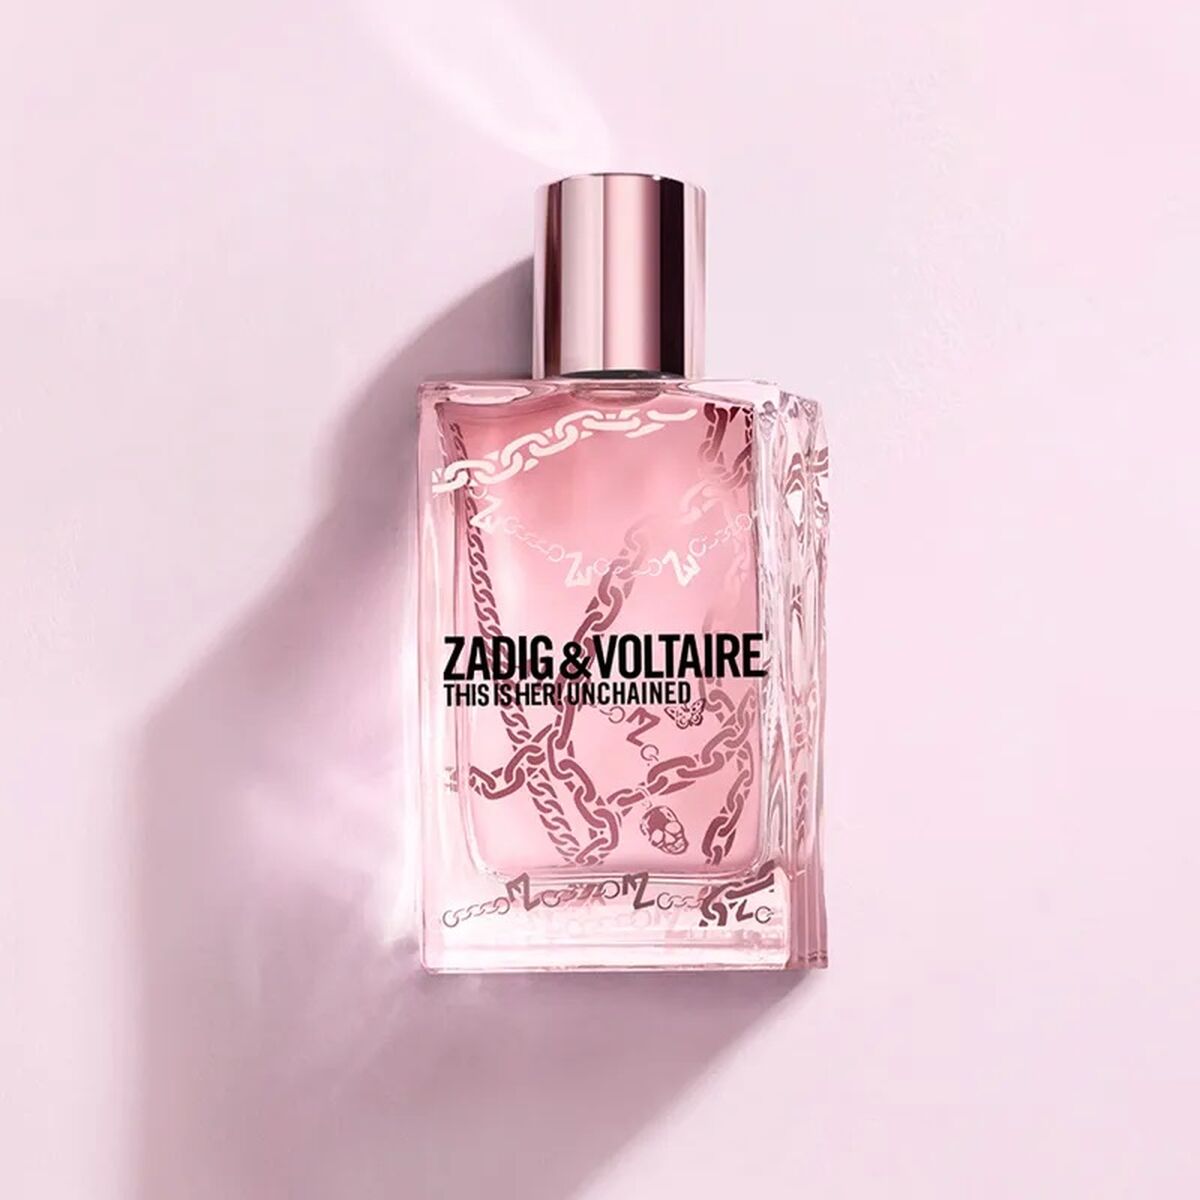 Dameparfume Zadig & Voltaire This Is Her! Unchained EDP 100 ml Limited edition